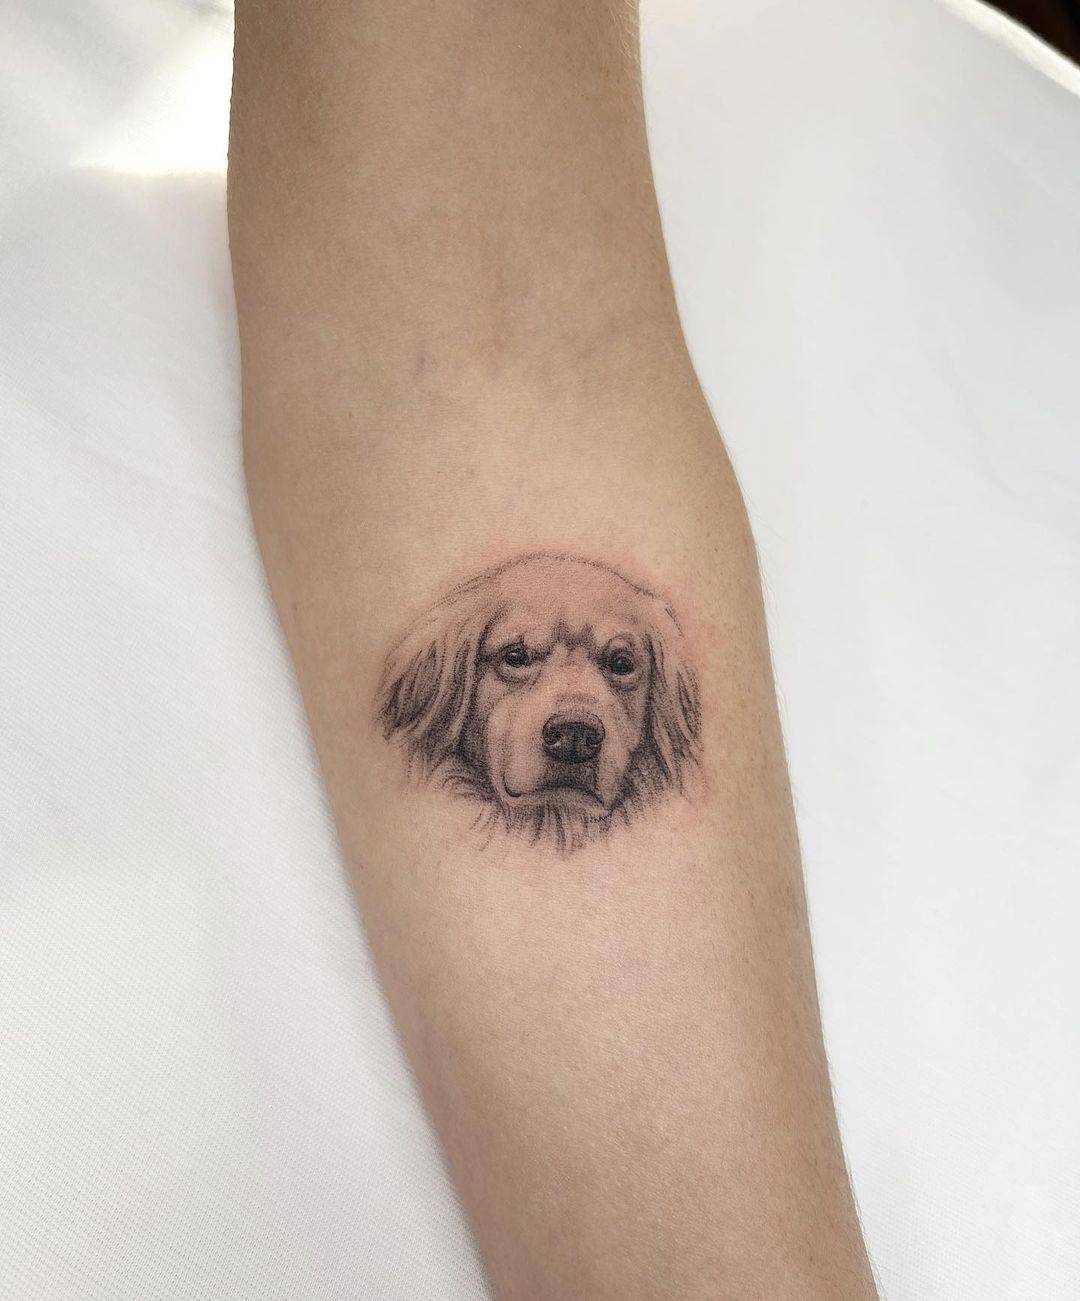 Black and gray dog portrait tattoo by kaan.tattoo